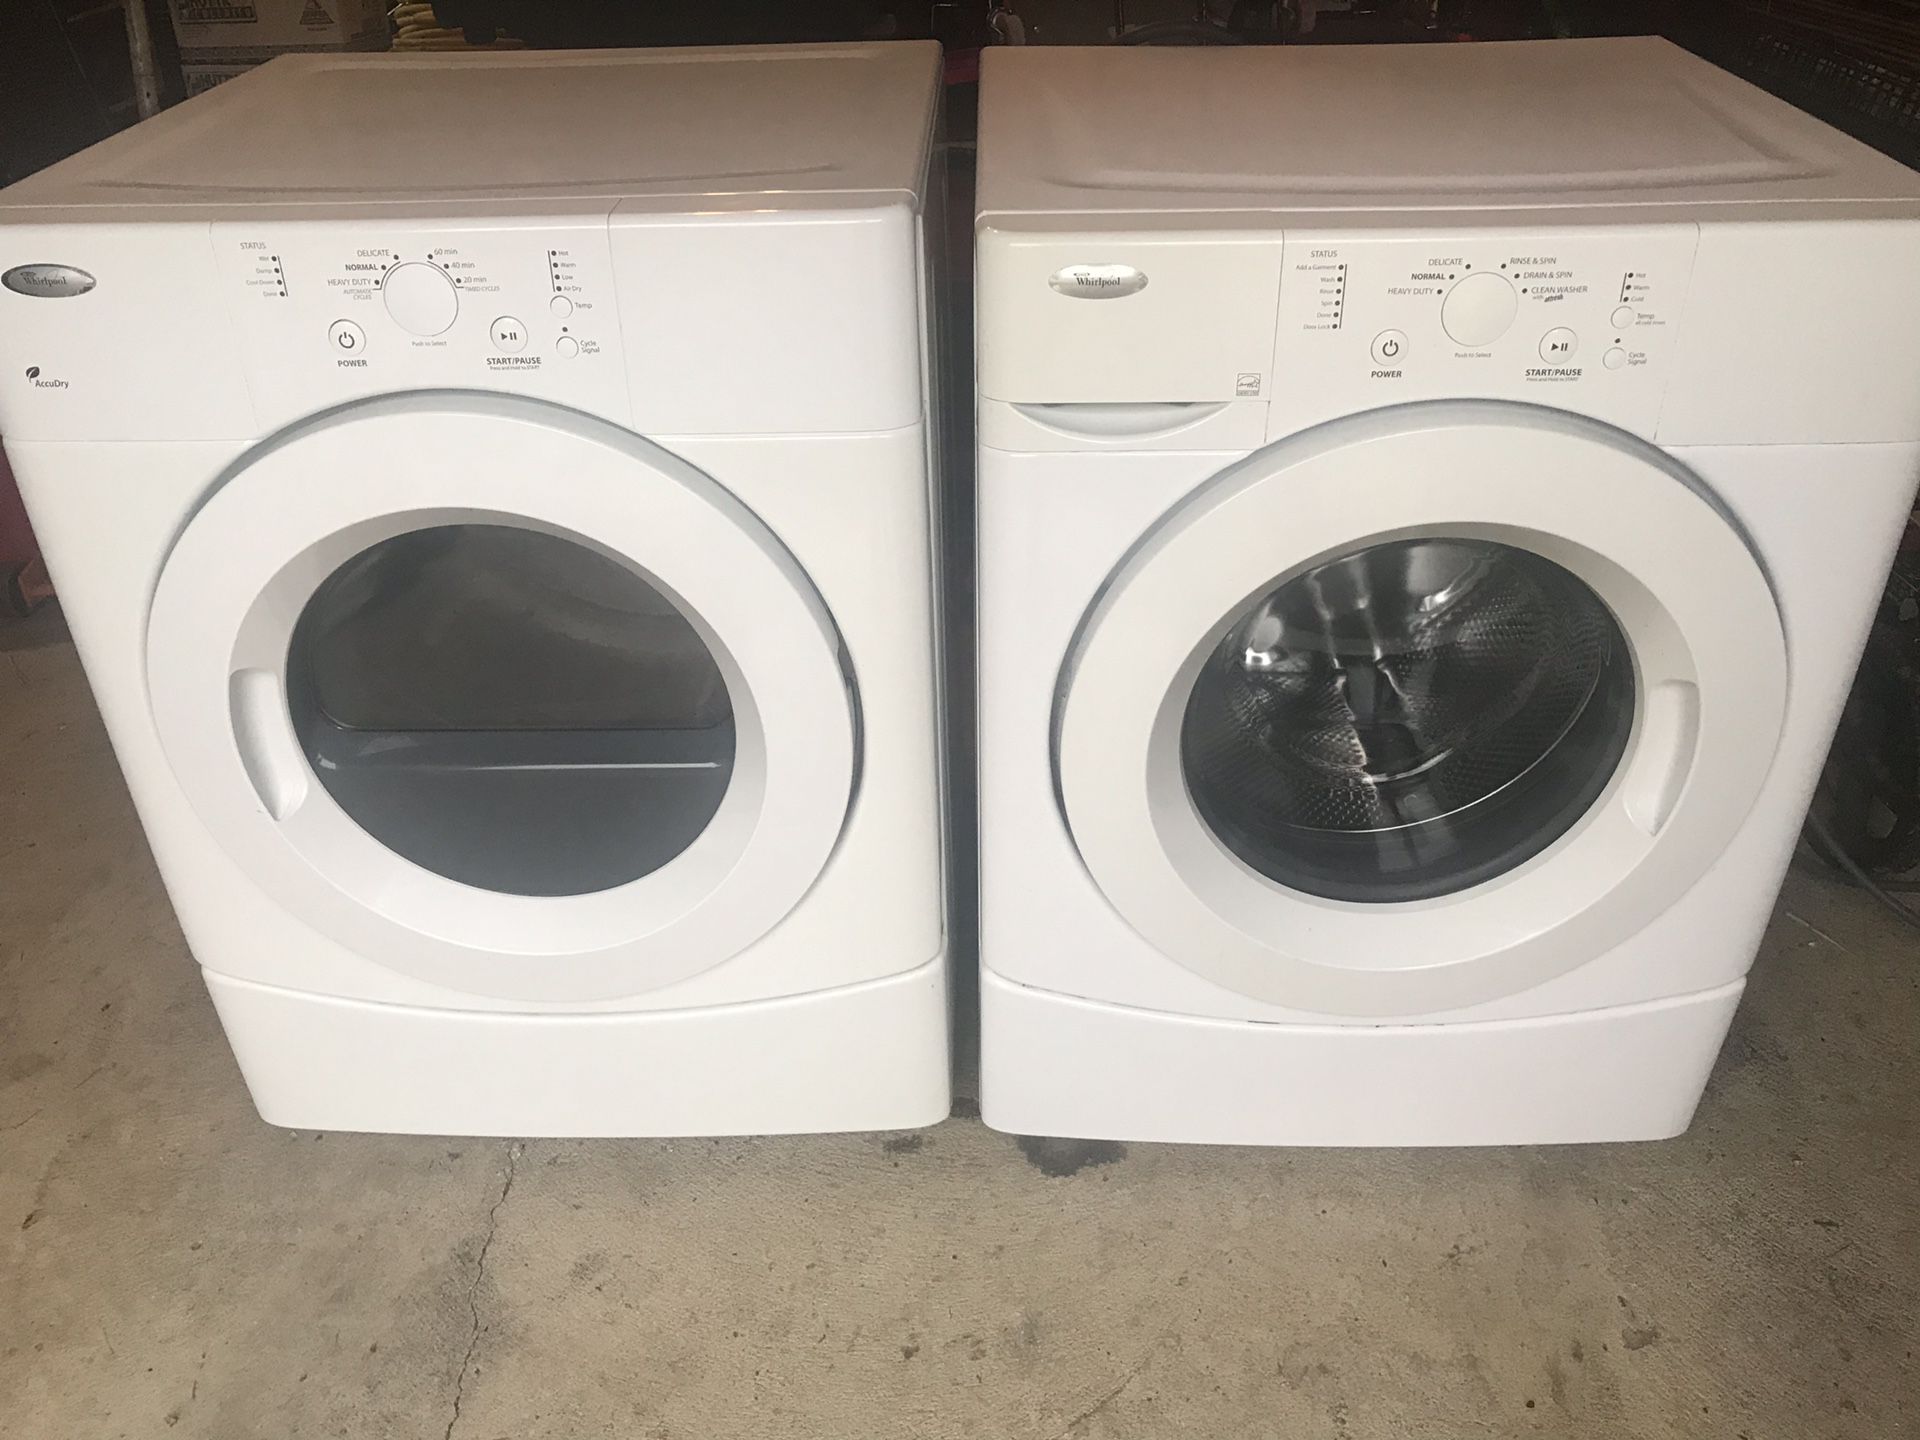 Whirlpool matching Washer and Dryer